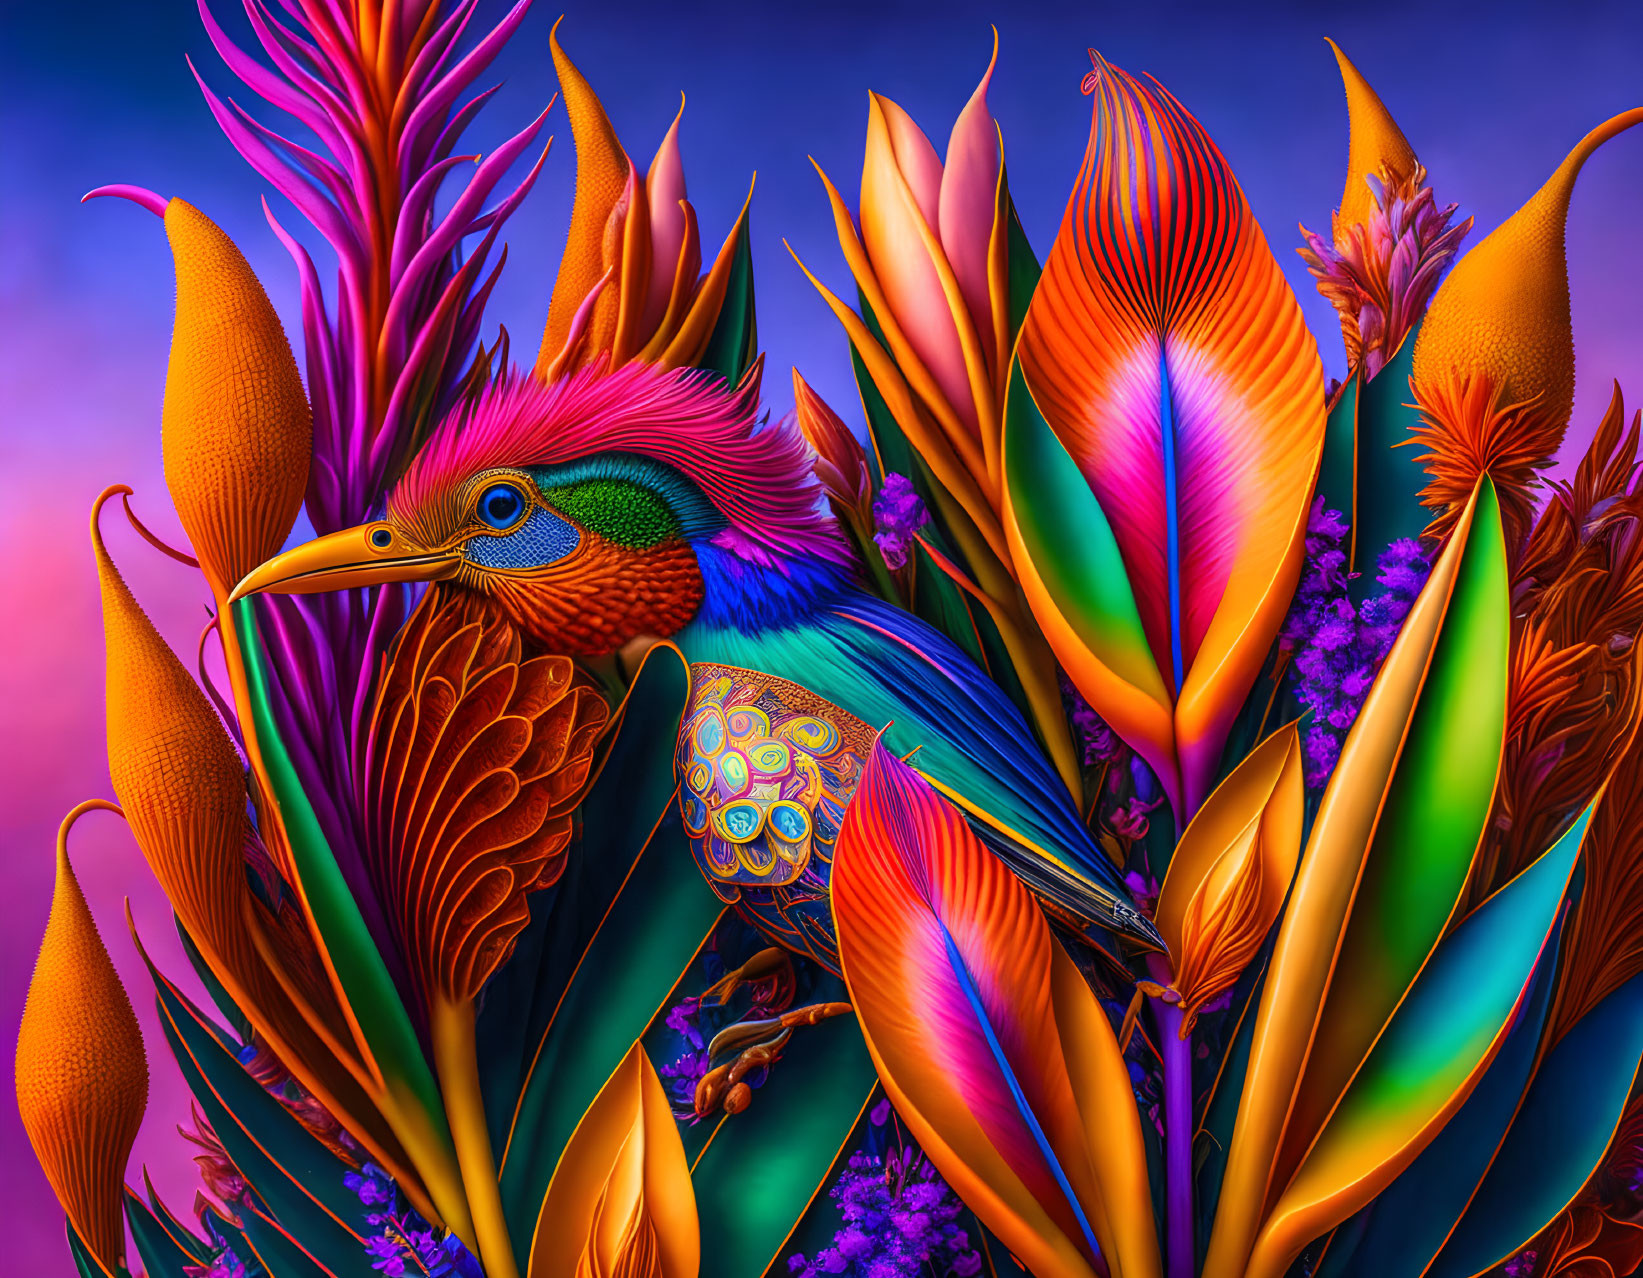 Colorful Stylized Bird in Exotic Plant Setting with Purple Sky